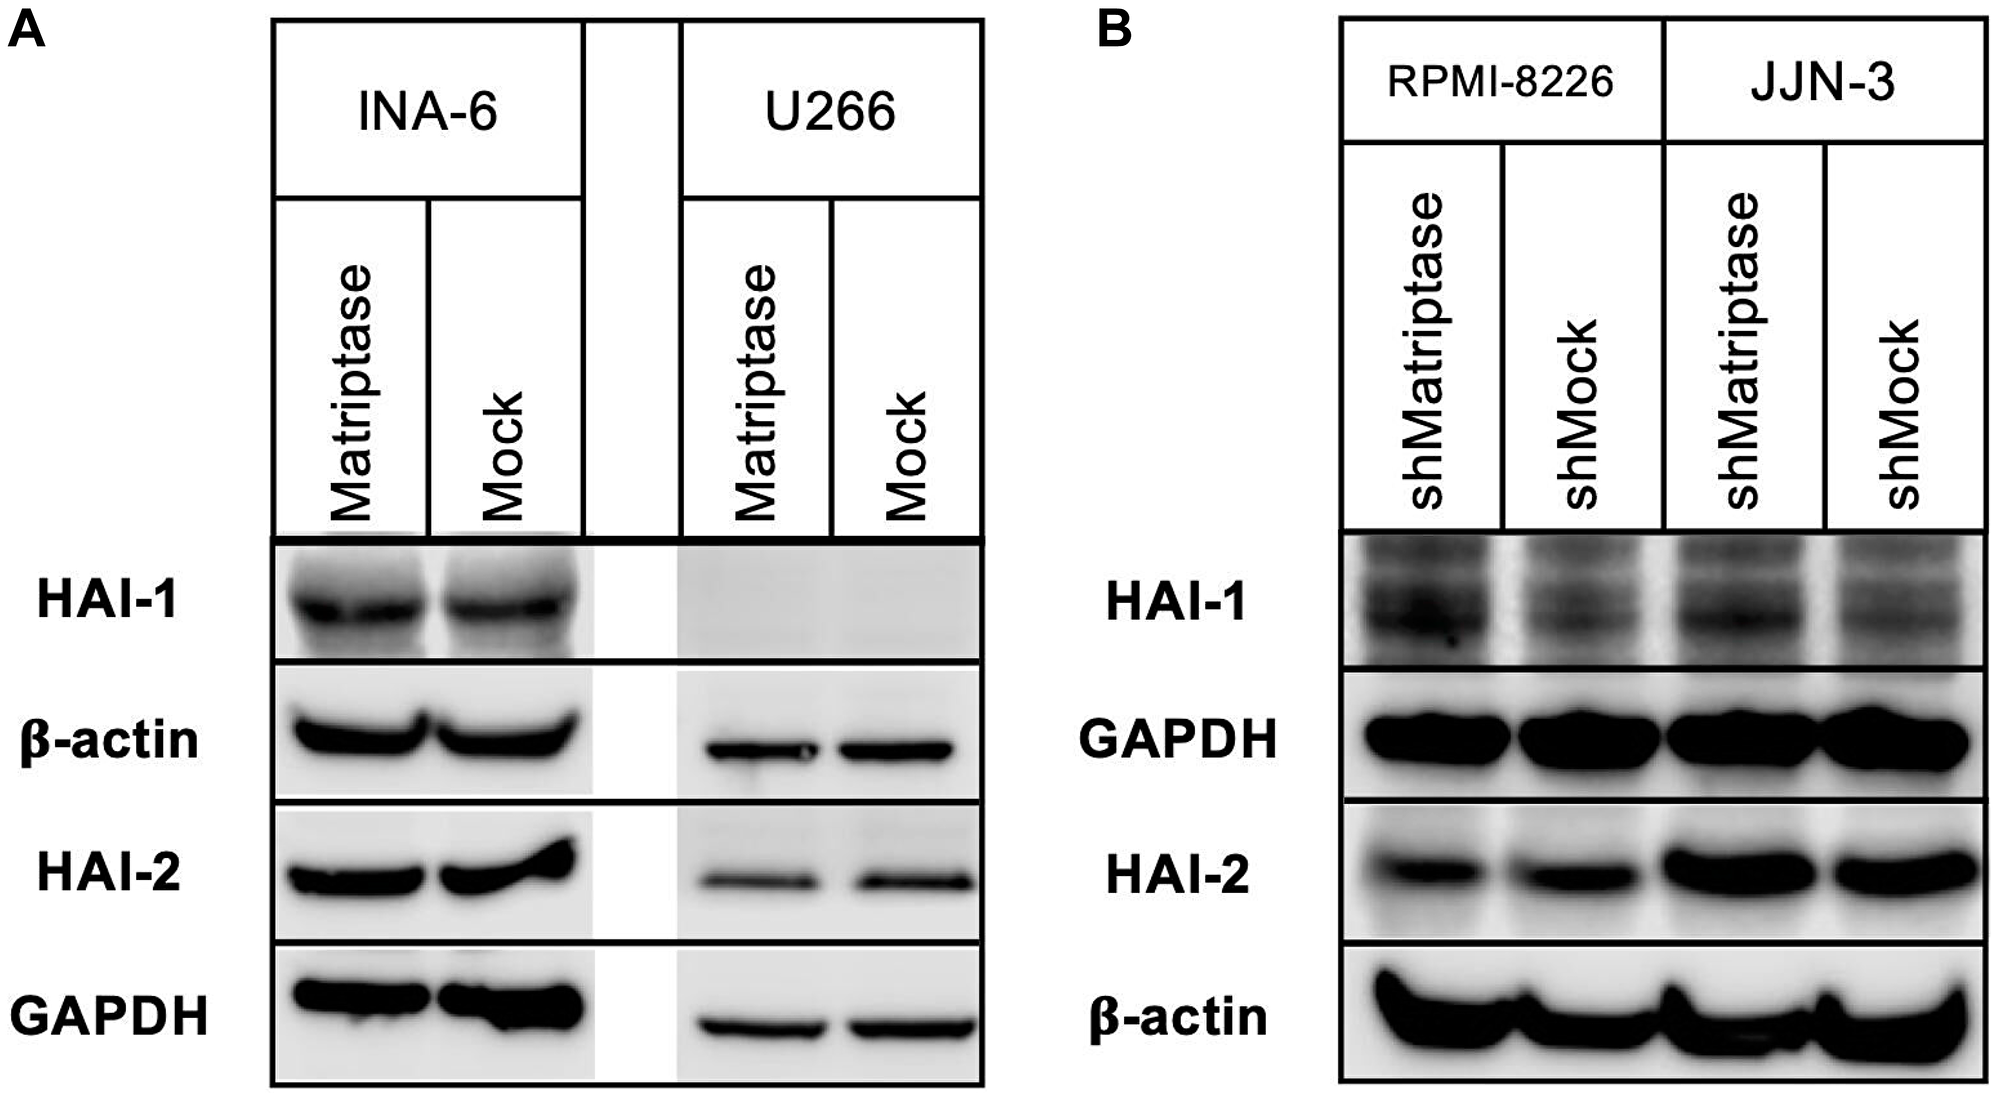 HAI-1 and HAI-2 protein expression in matriptase overexpression and knockdown myeloma cell lines.